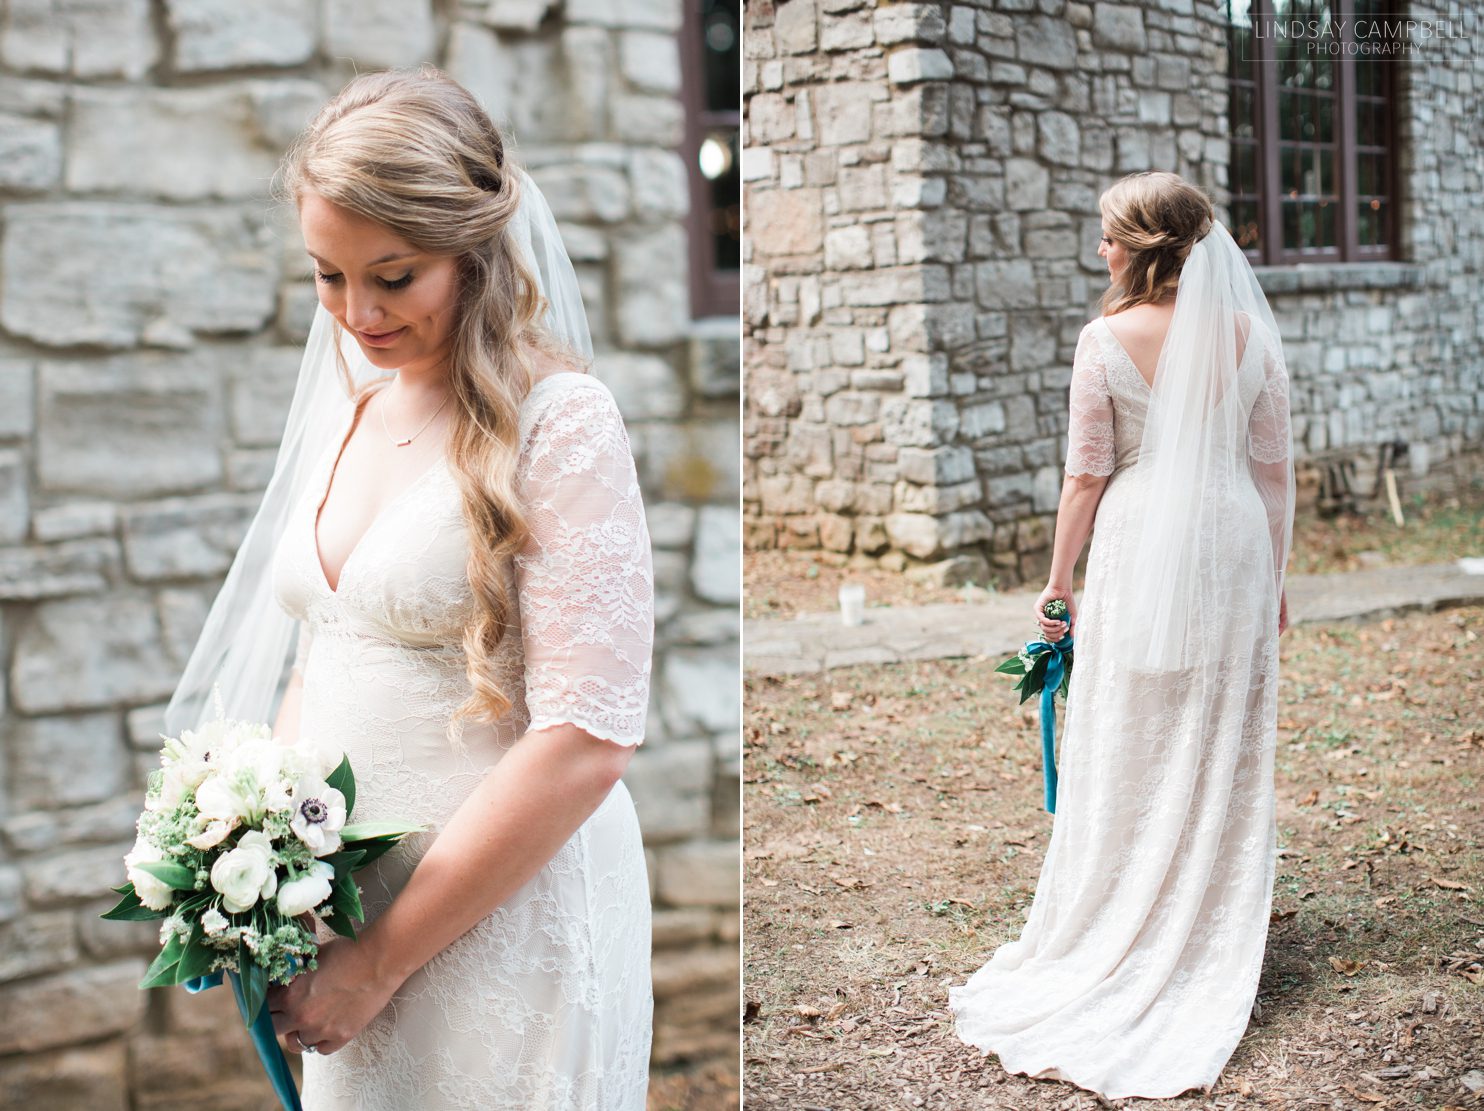 Taylor-and-Andrew-Nashville-Wooded-Wedding-Cedars-of-Lebanon-State-Park-Wedding-Photos_0054 Taylor + Andrew's Geode-Themed Lodge Wedding in the Woods